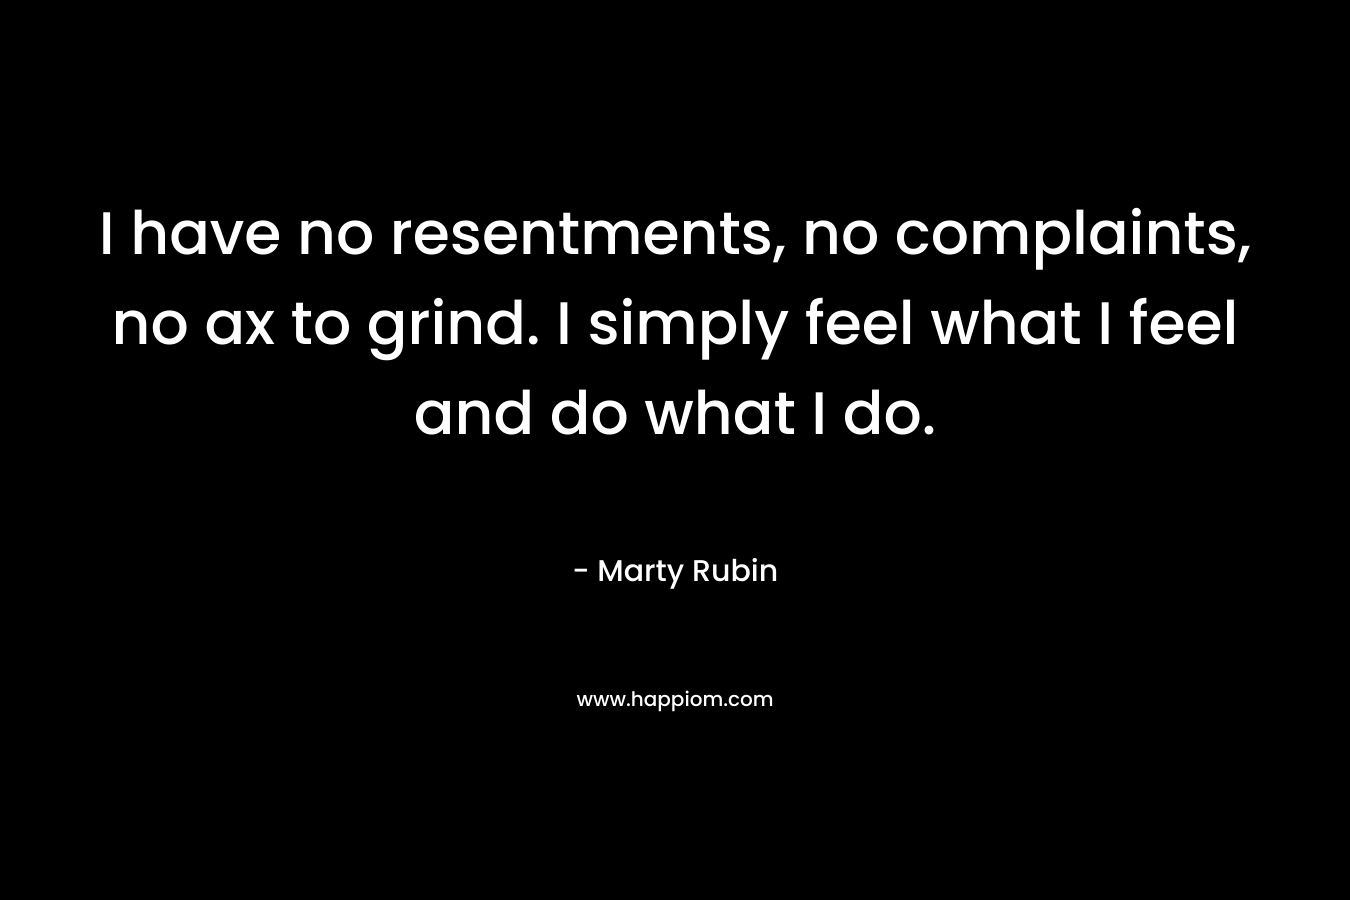 I have no resentments, no complaints, no ax to grind. I simply feel what I feel and do what I do.